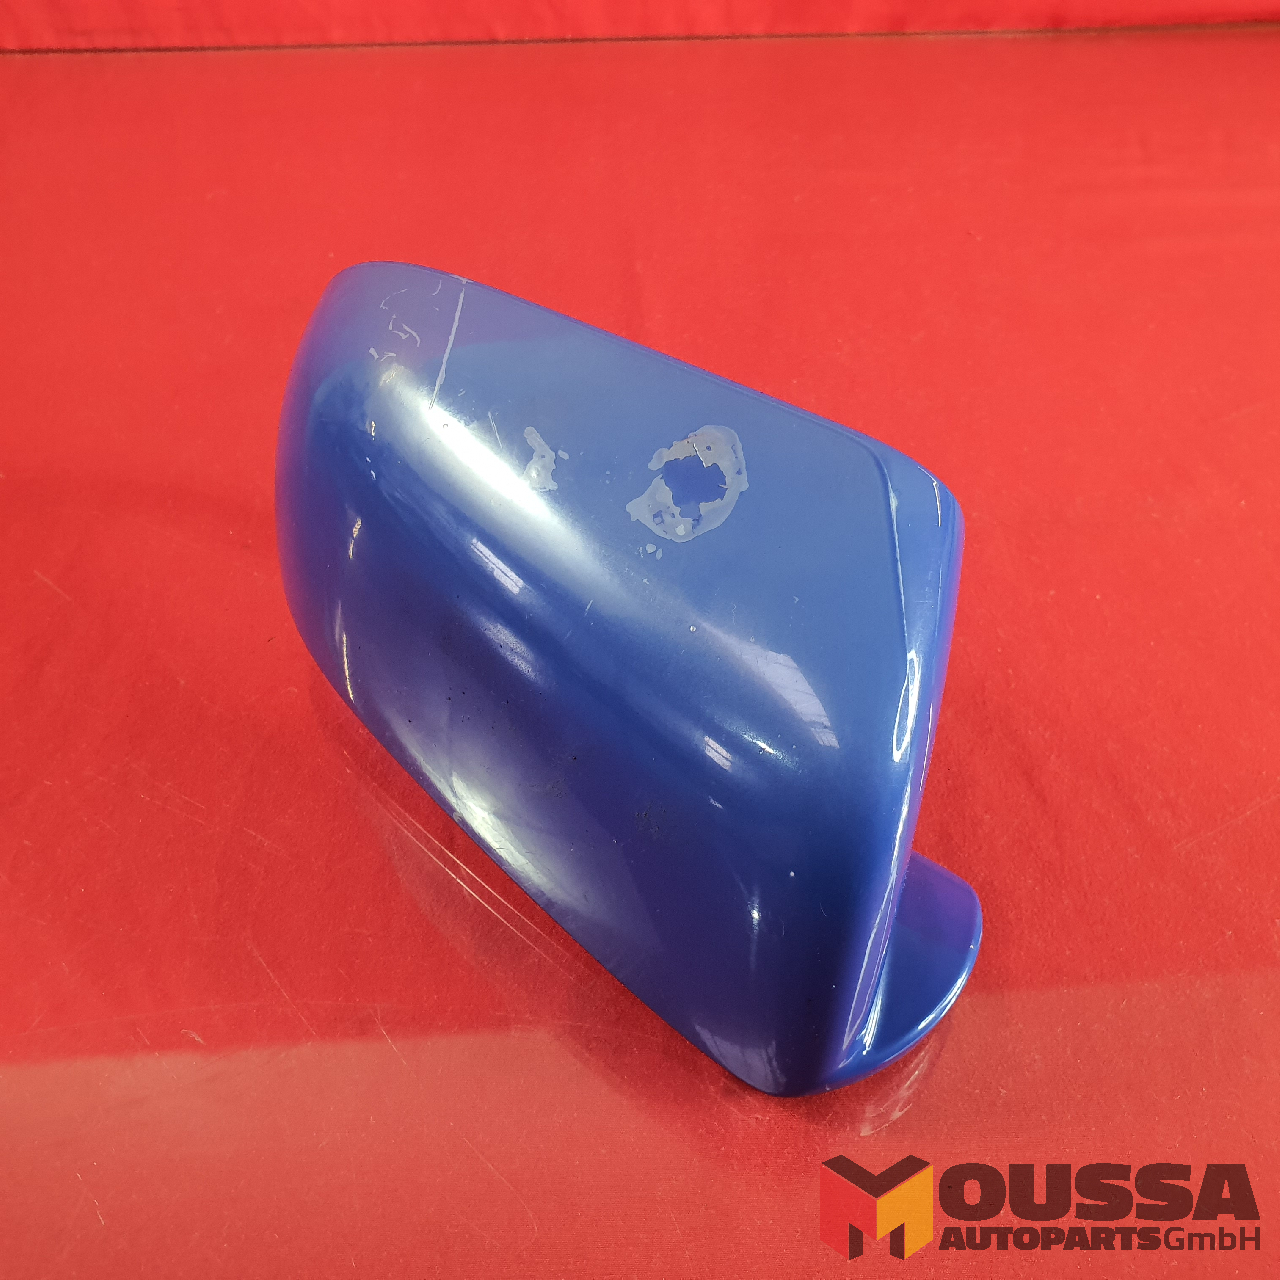 MOUSSA-AUTOPARTS-65bf9aa510a3a.jpg